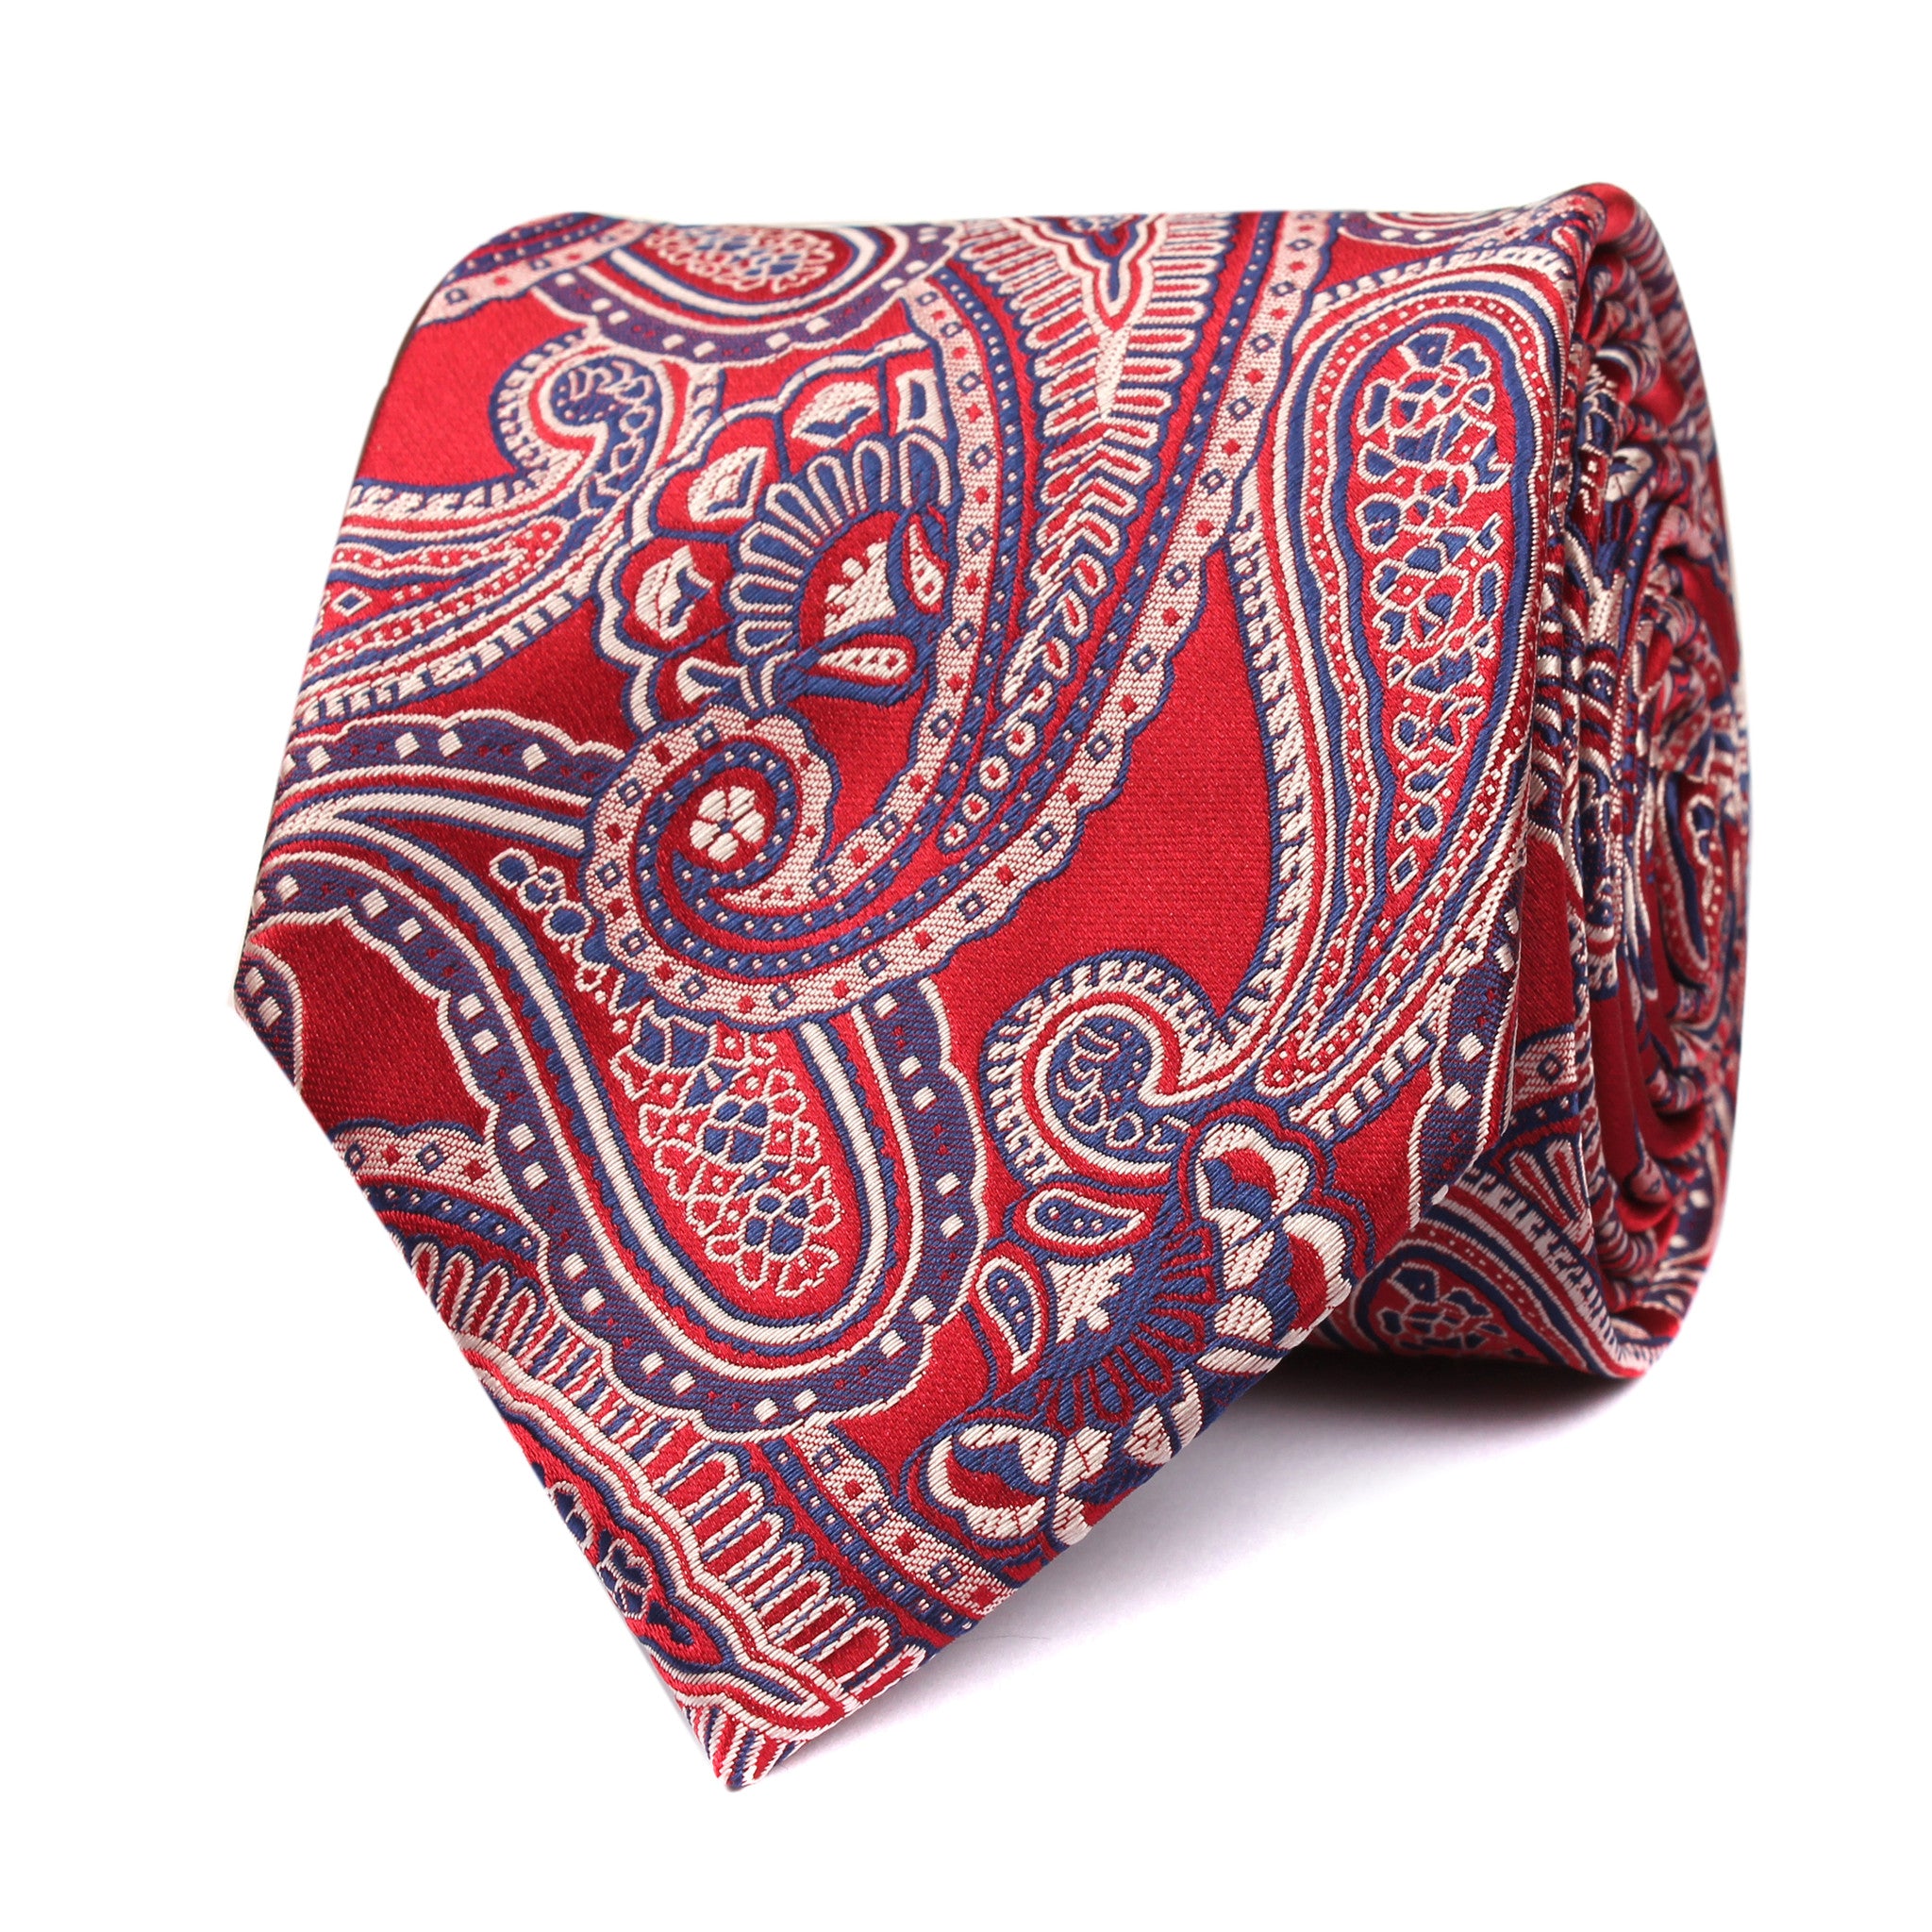 Paisley Red Tie Front View